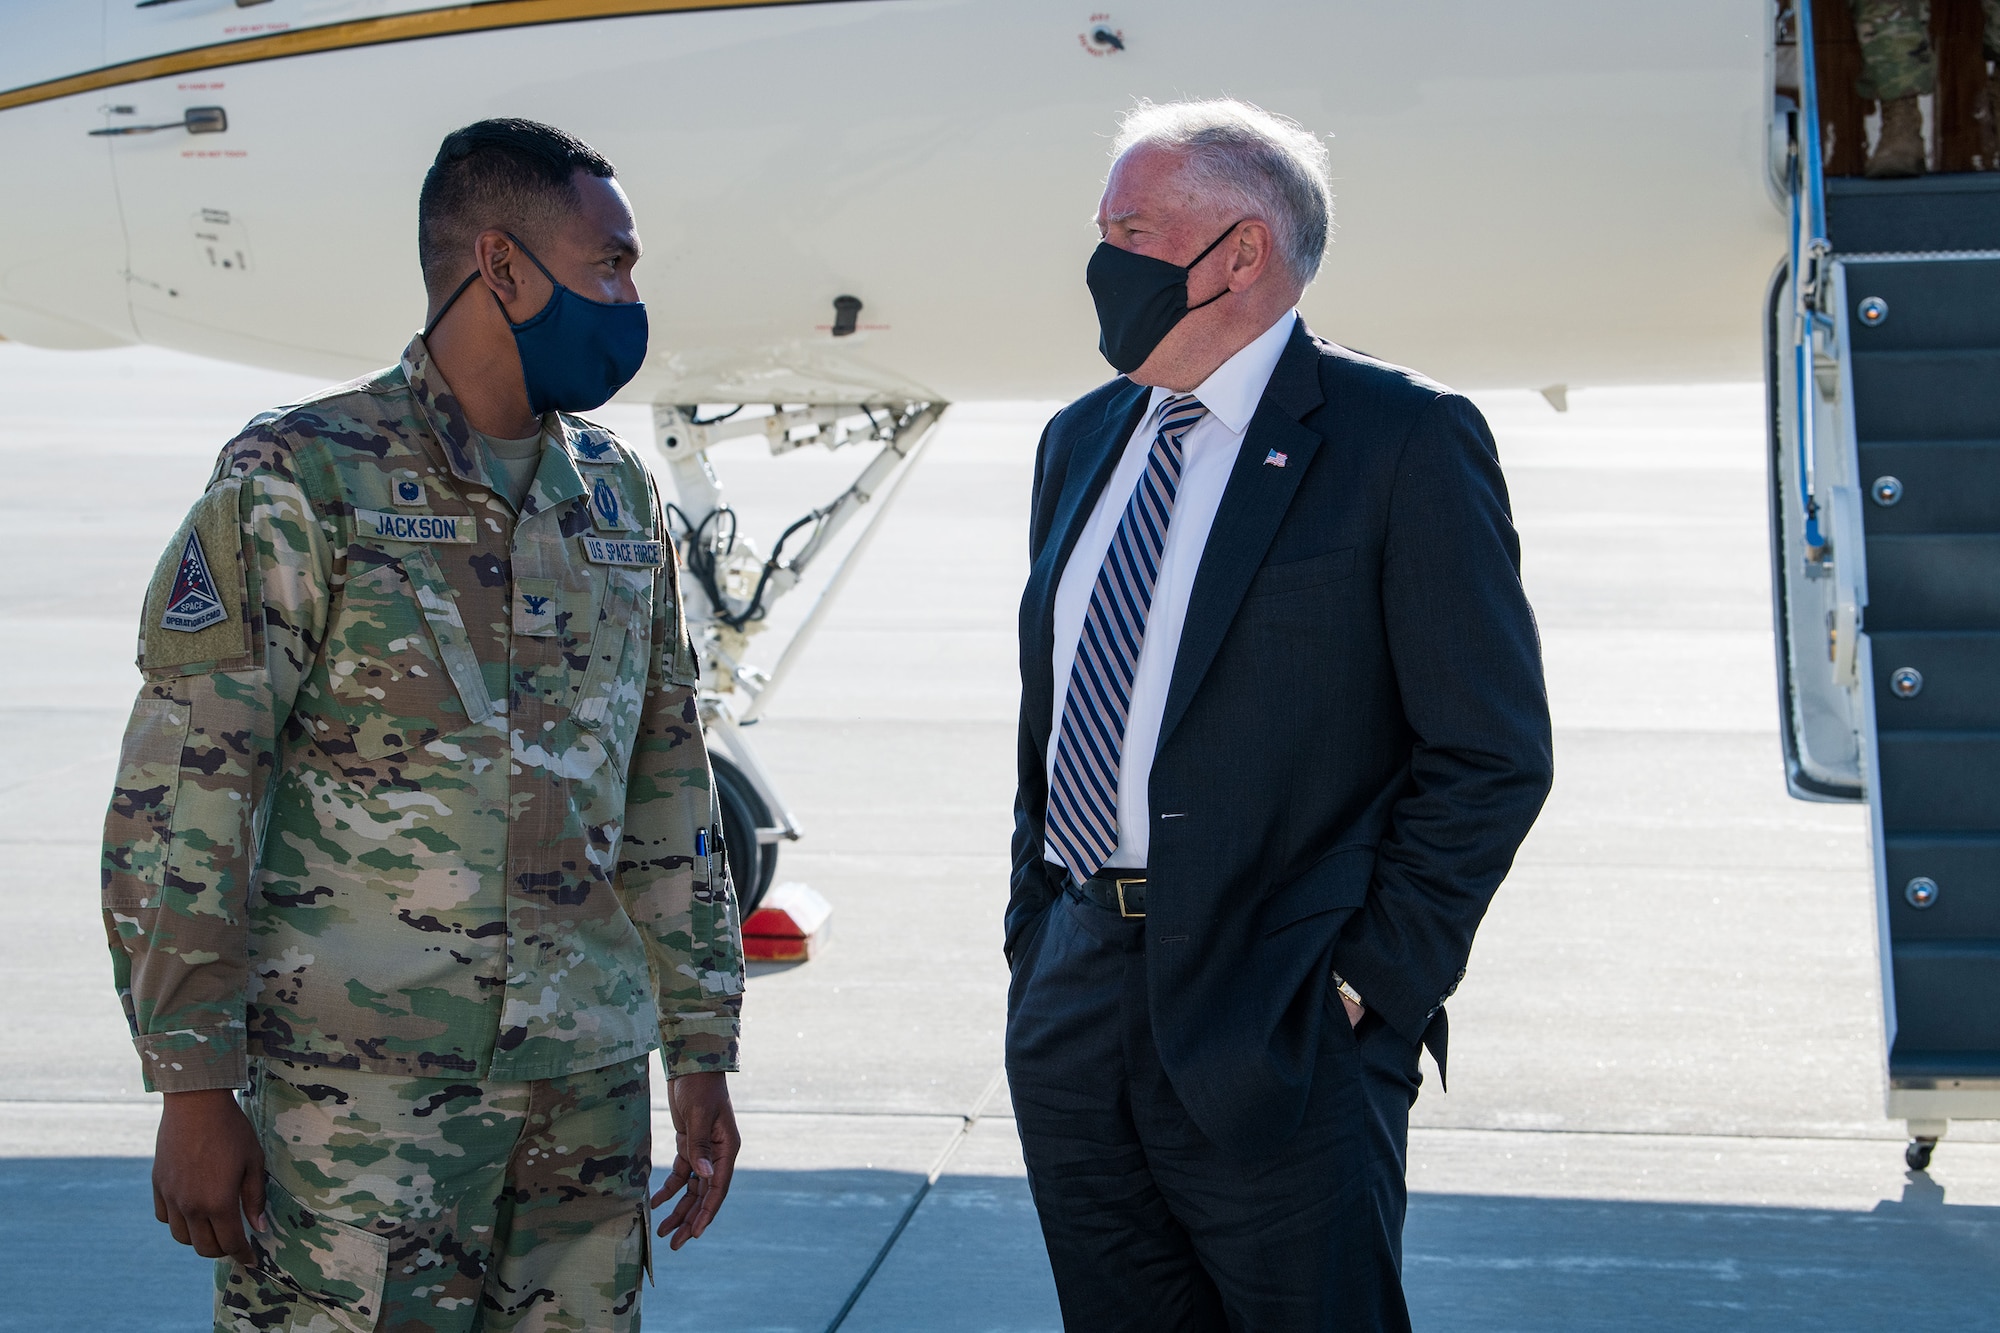 U.S. Space Force Col. Marcus Jackson (left), the Buckley Garrison commander, greets Secretary of the Air Force Frank Kendall on the flightline at Buckley Space Force Base, Colo., Aug. 23, 2021.